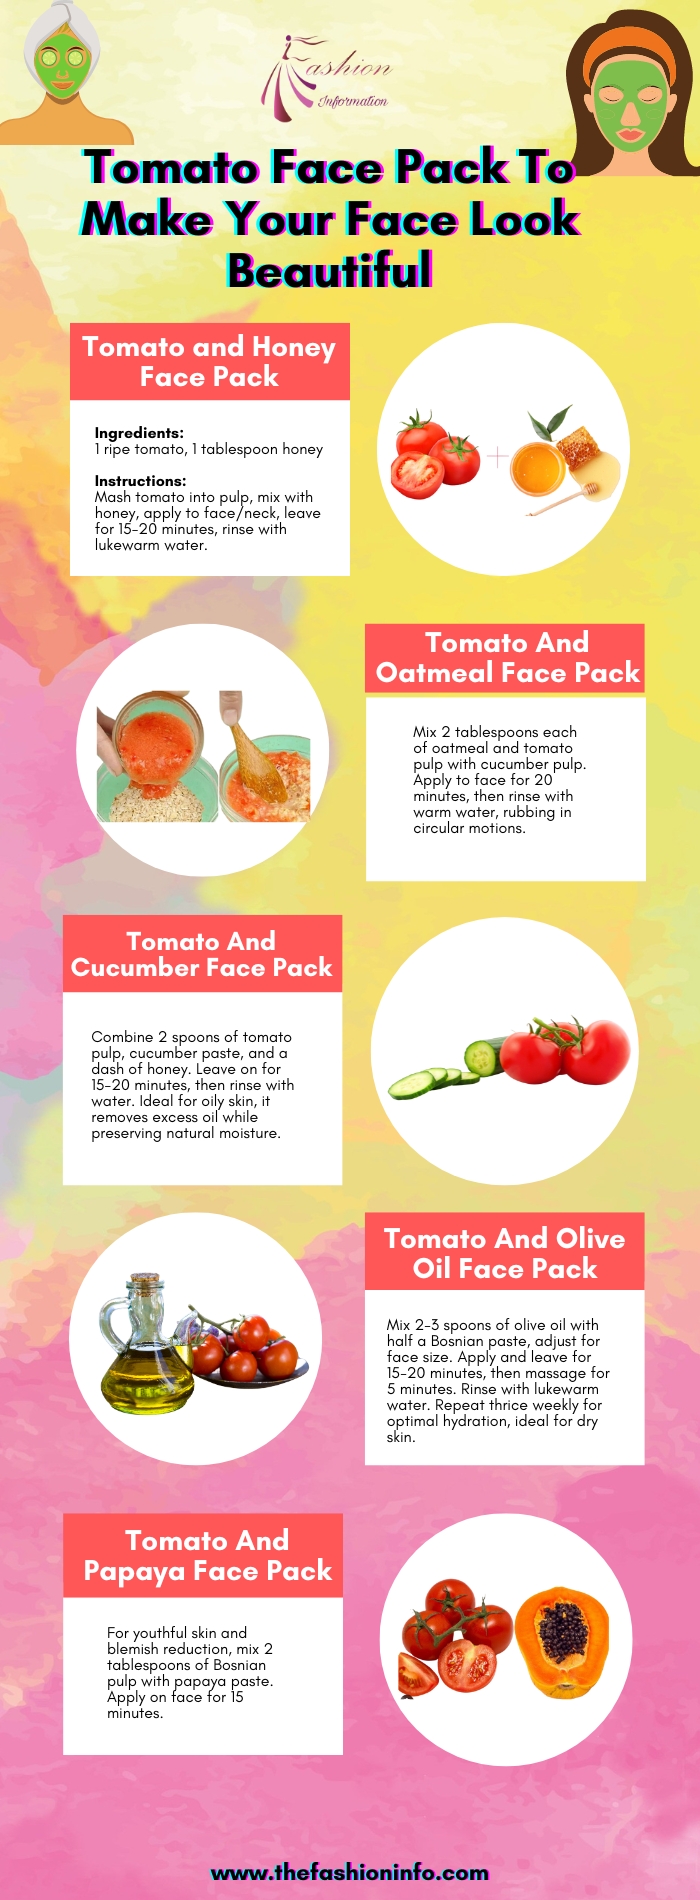 Tomato Face Pack To Make Your Face Look Beautiful